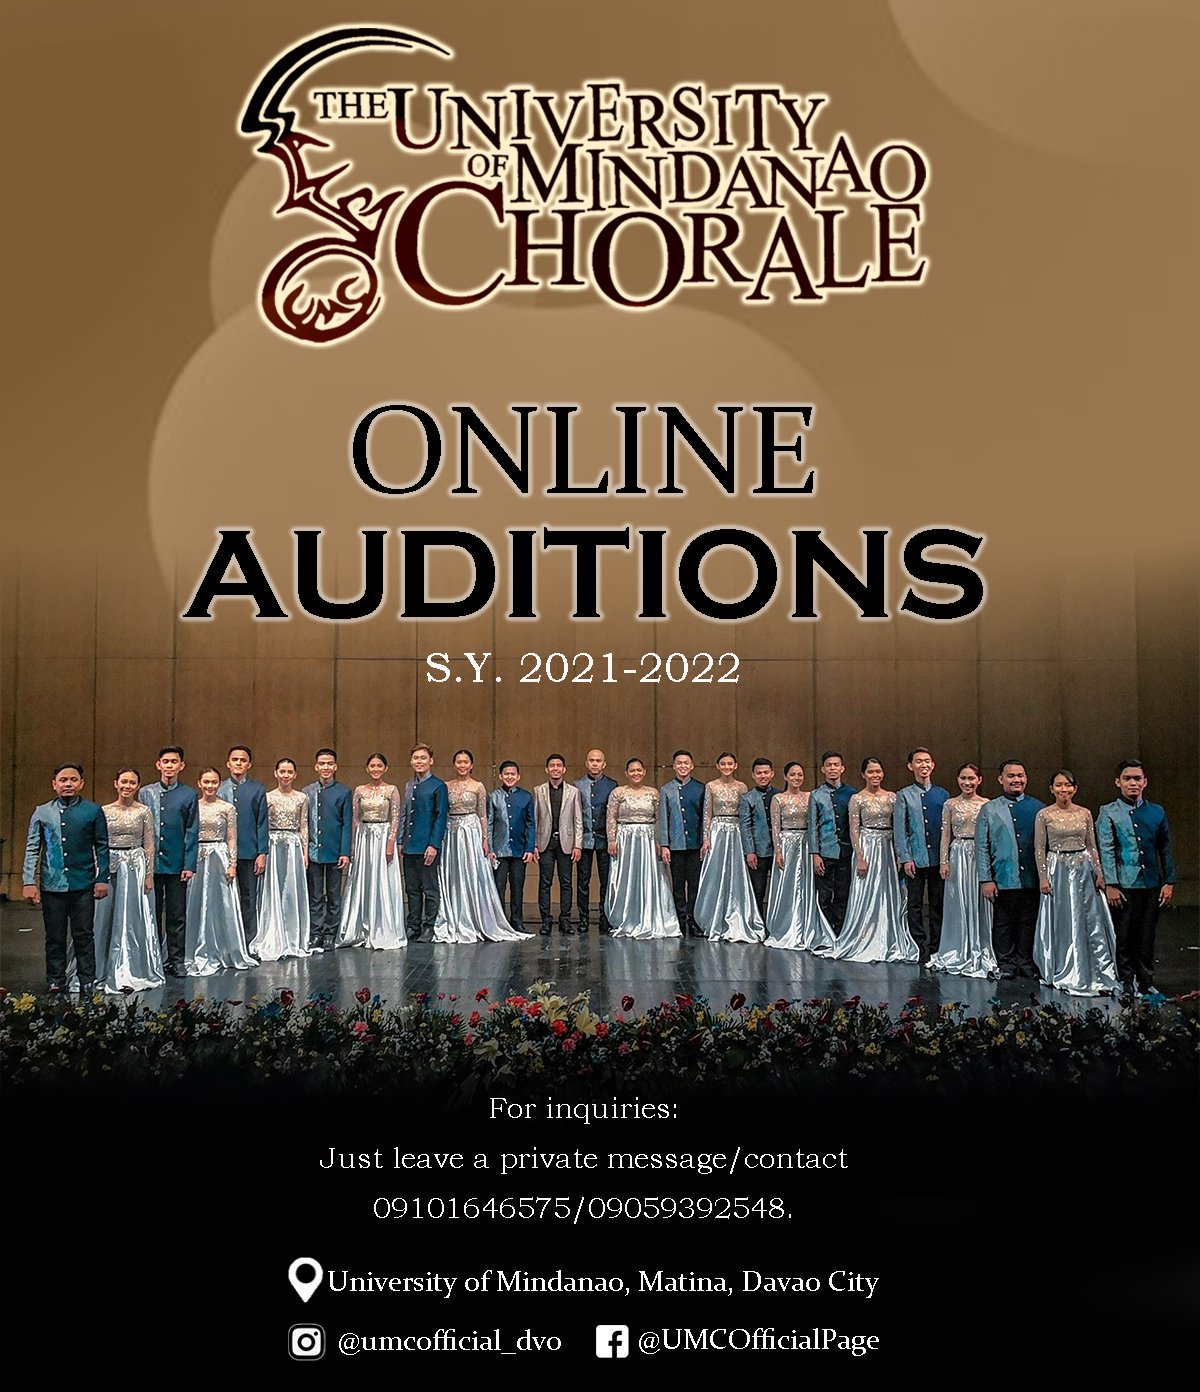 YOU MIGHT BE THE ONE: UM Chorale opens auditions